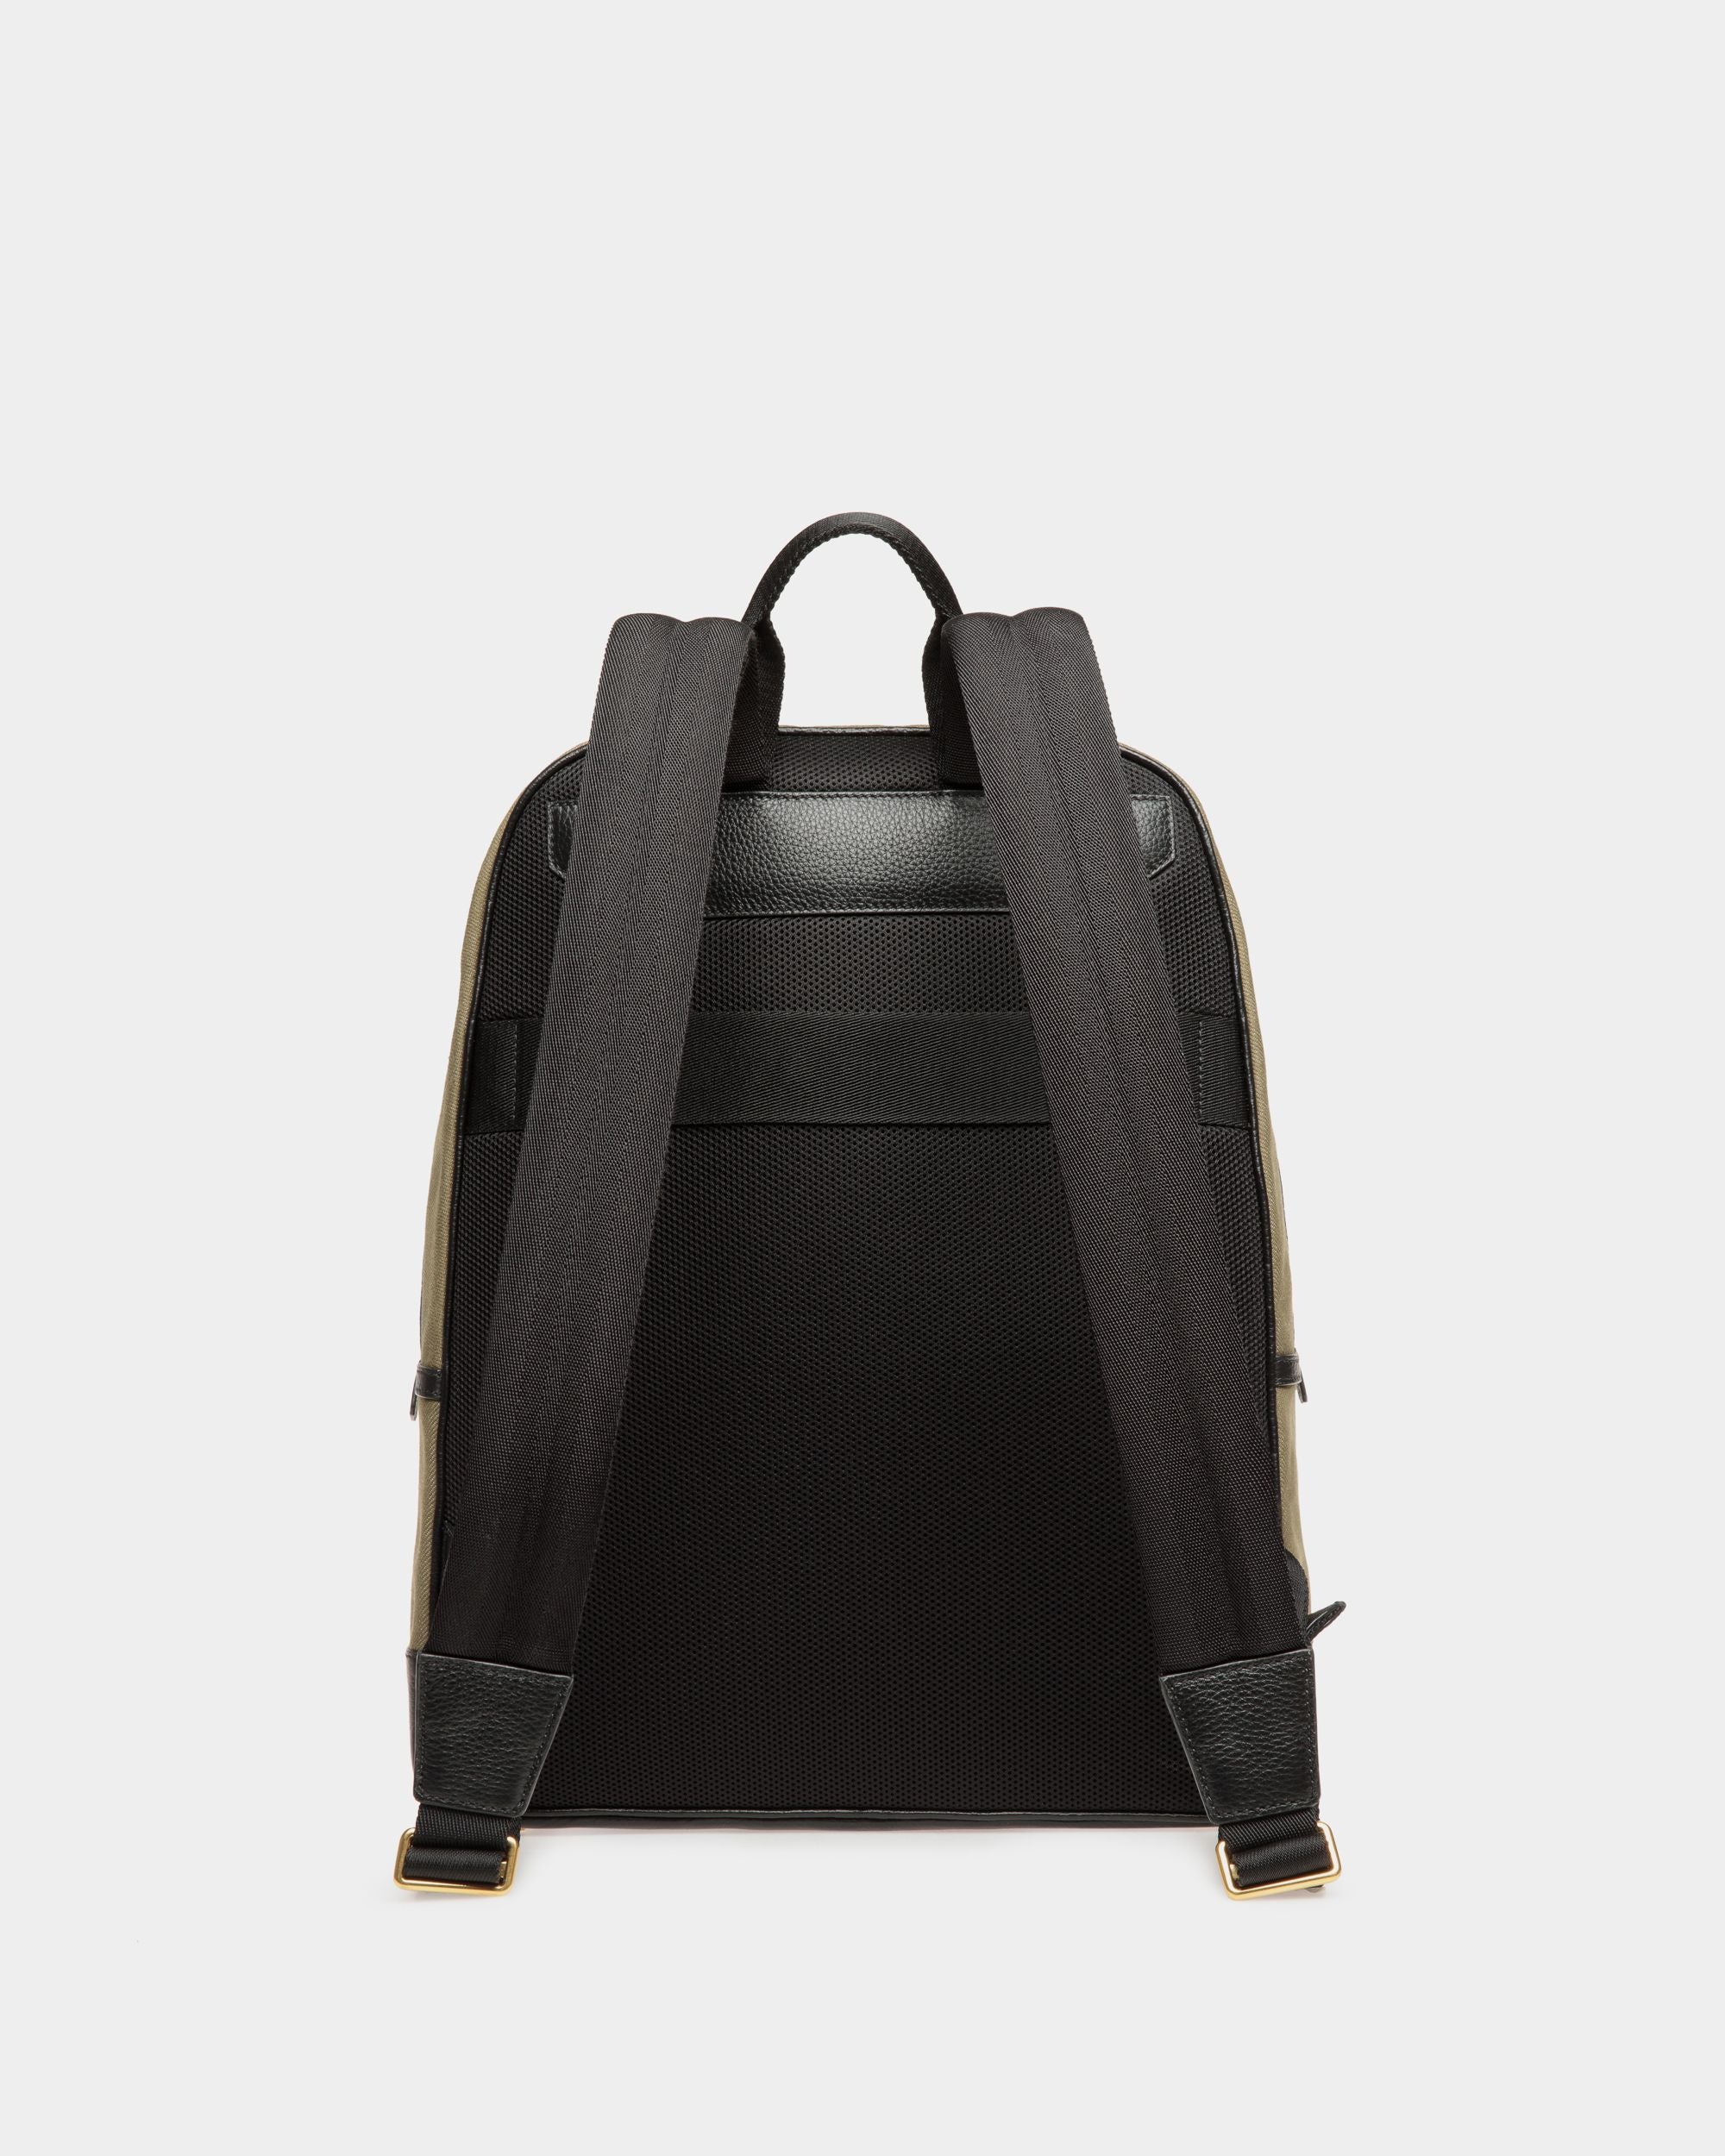 Bar | Men's Backpack in Green Canvas And Black Leather | Bally | Still Life Back